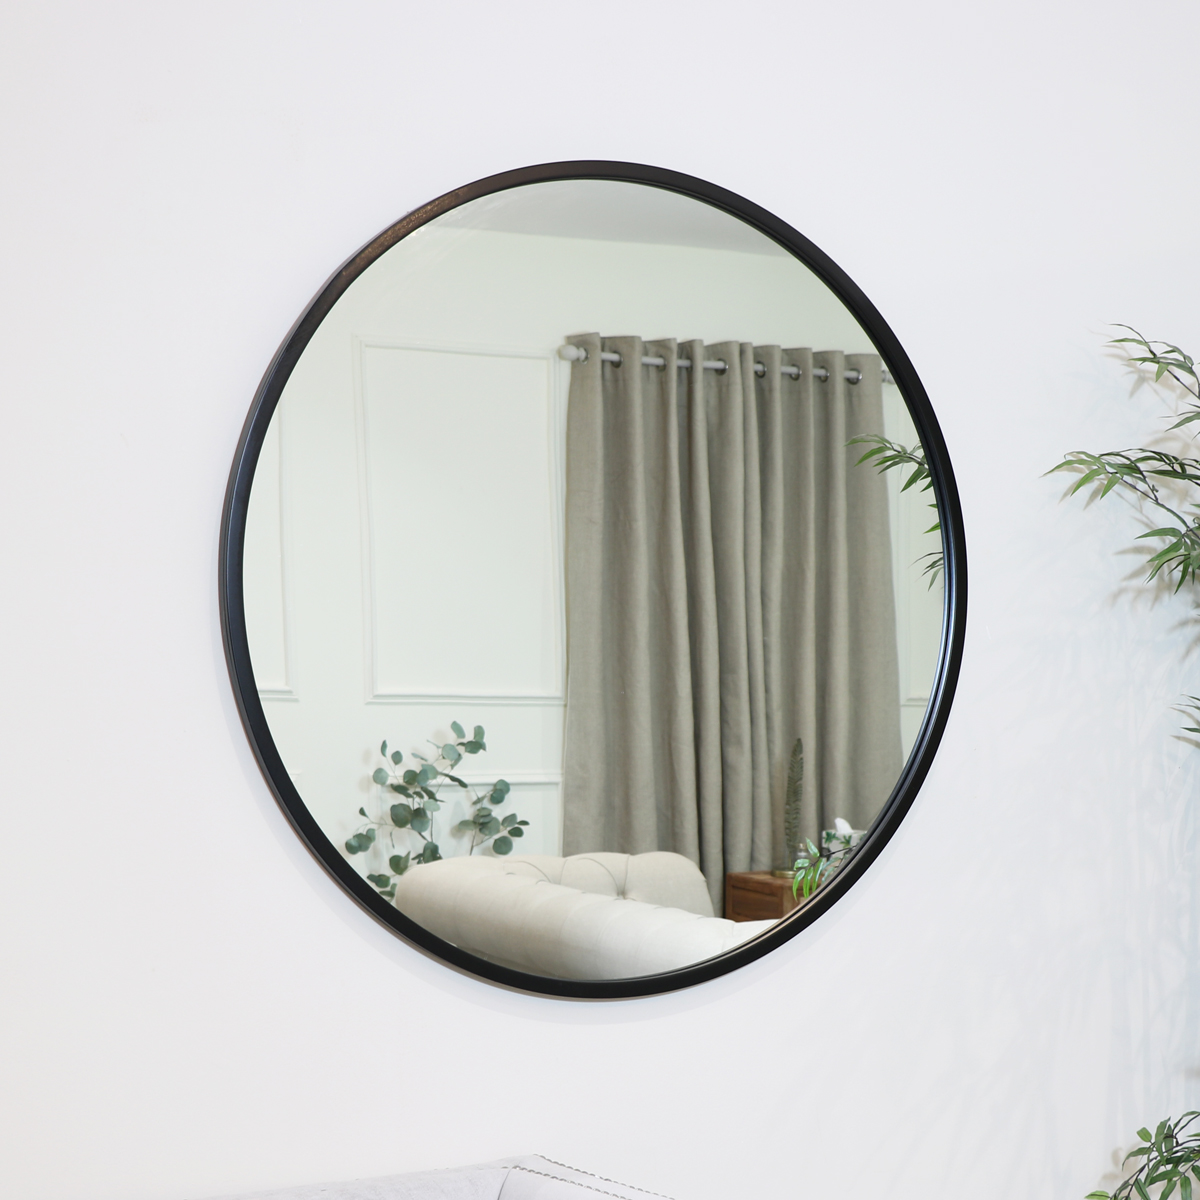 Large Round Black Mirror 100cm X, Large Round Decorative Mirrors For Living Room